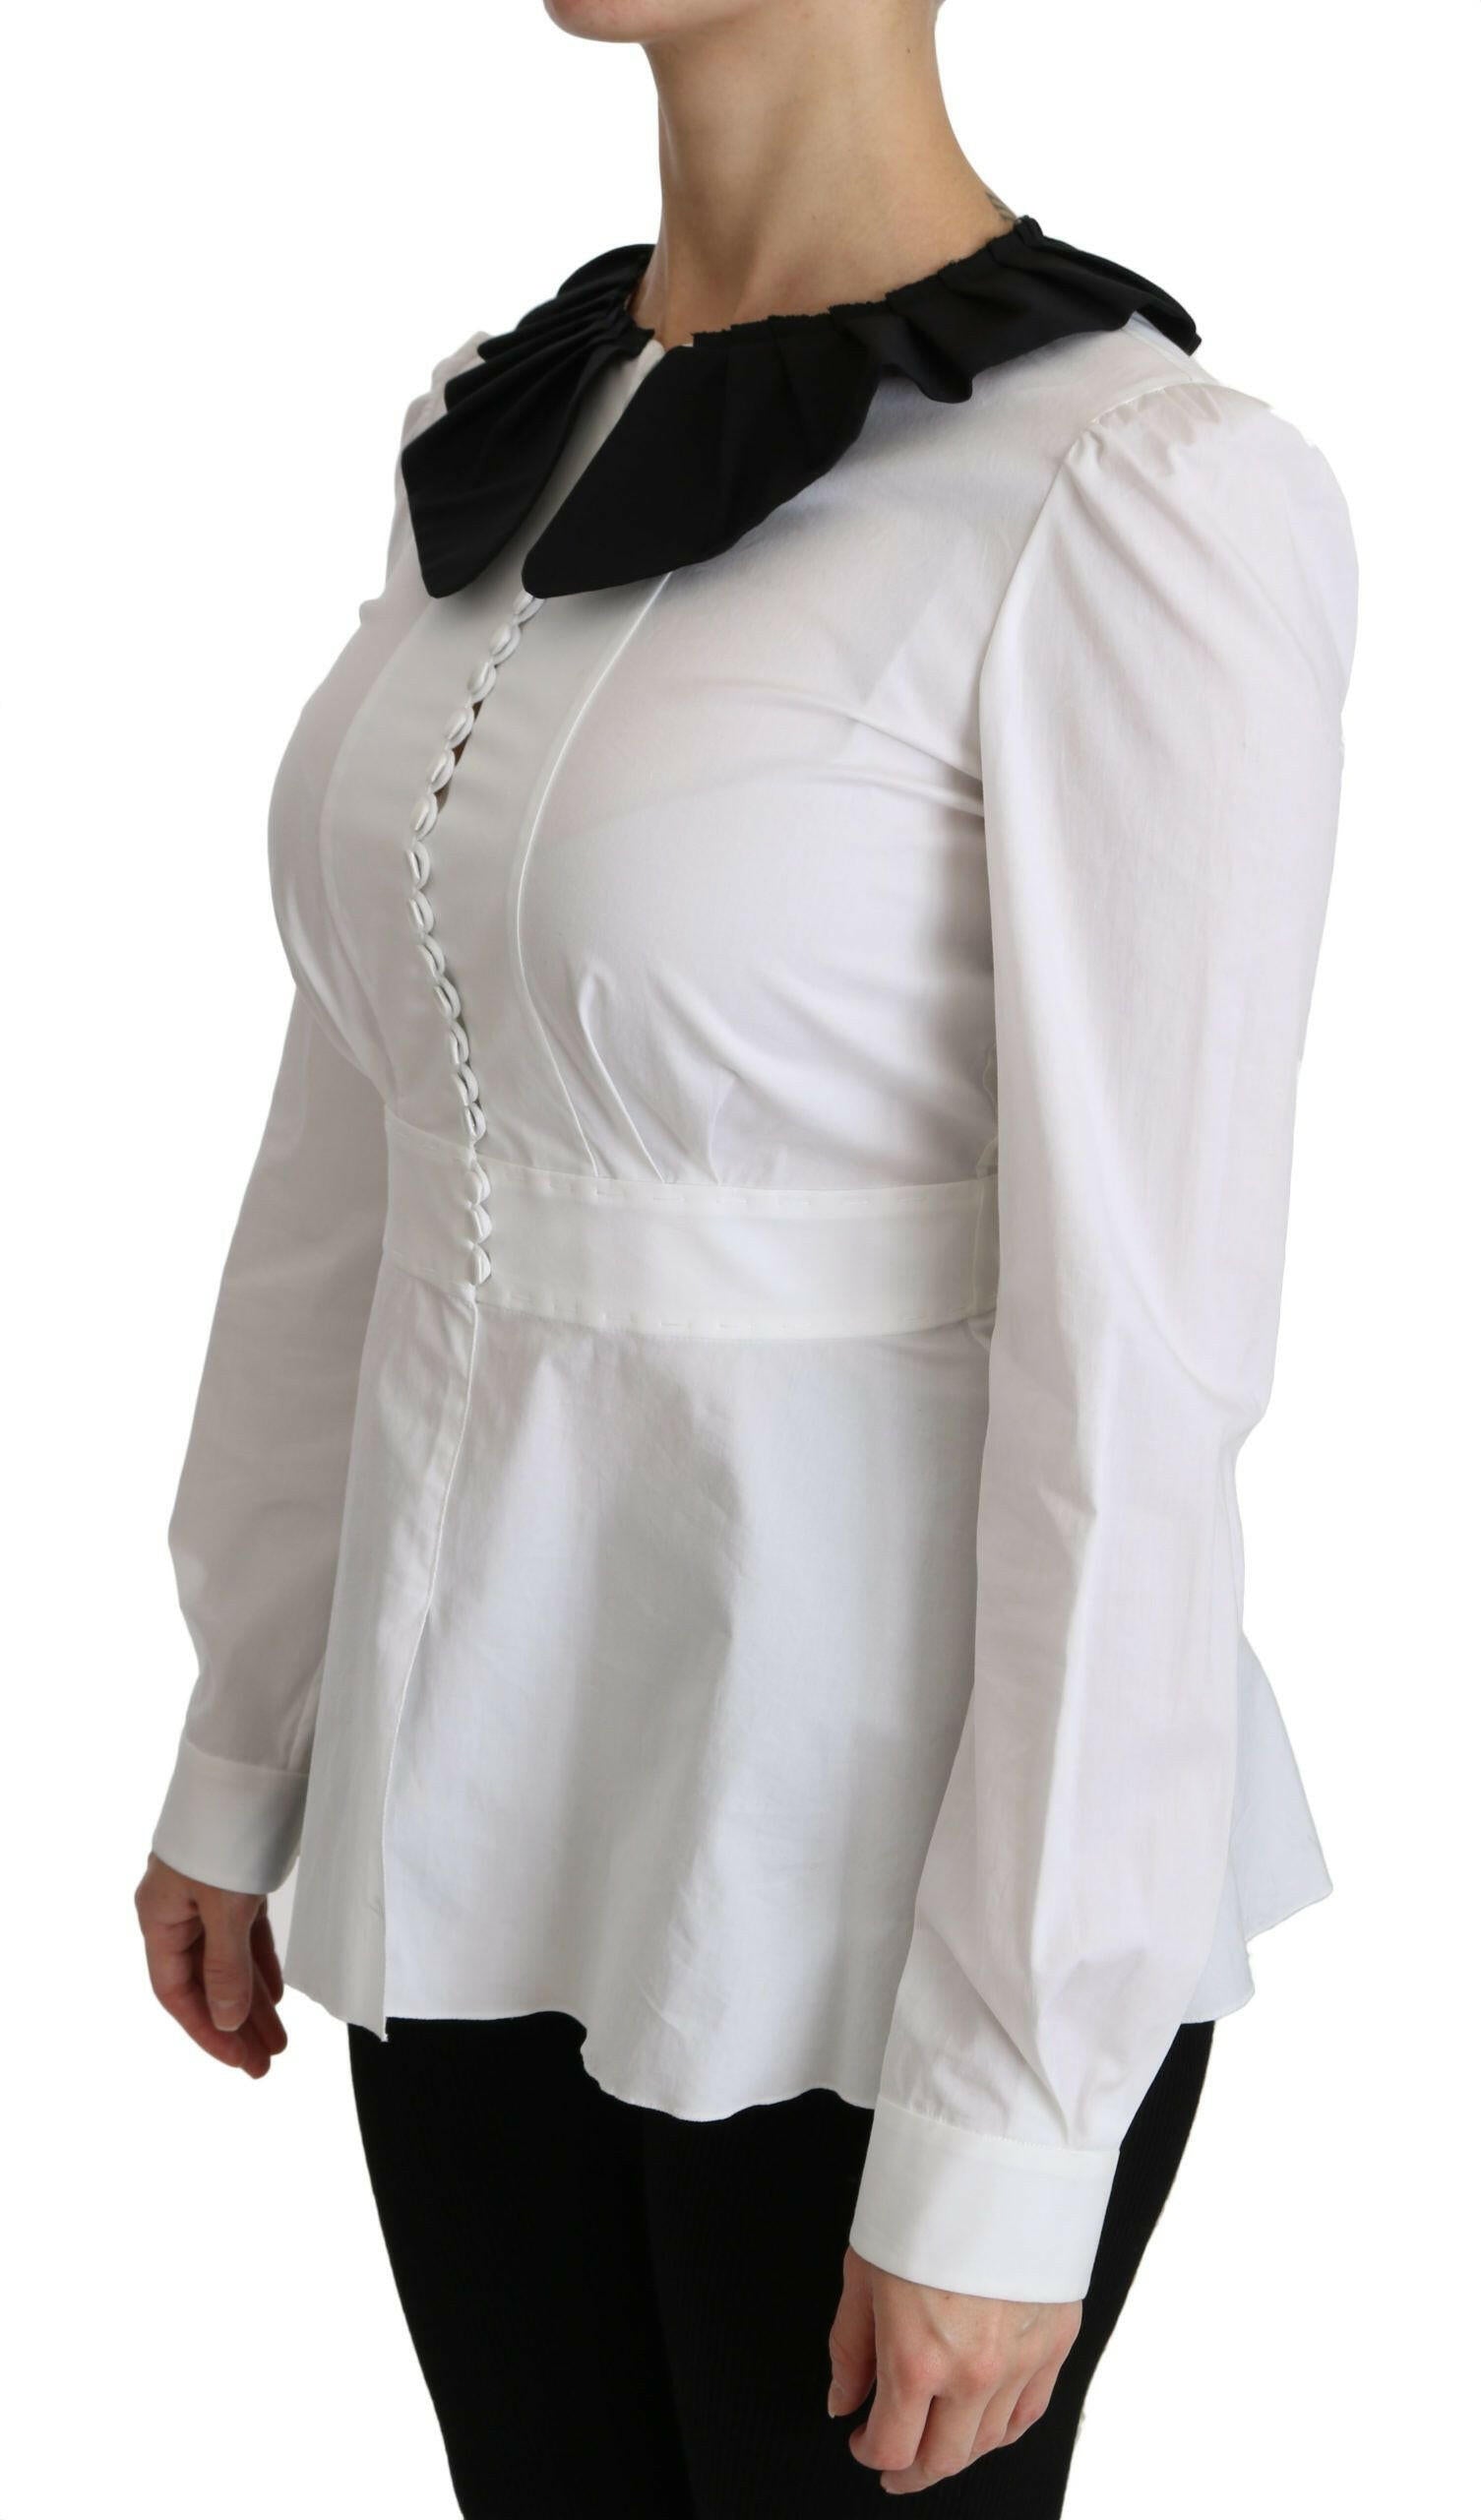 Dolce & Gabbana White Collared Long Sleeve Blouse Cotton Top - GENUINE AUTHENTIC BRAND LLC  